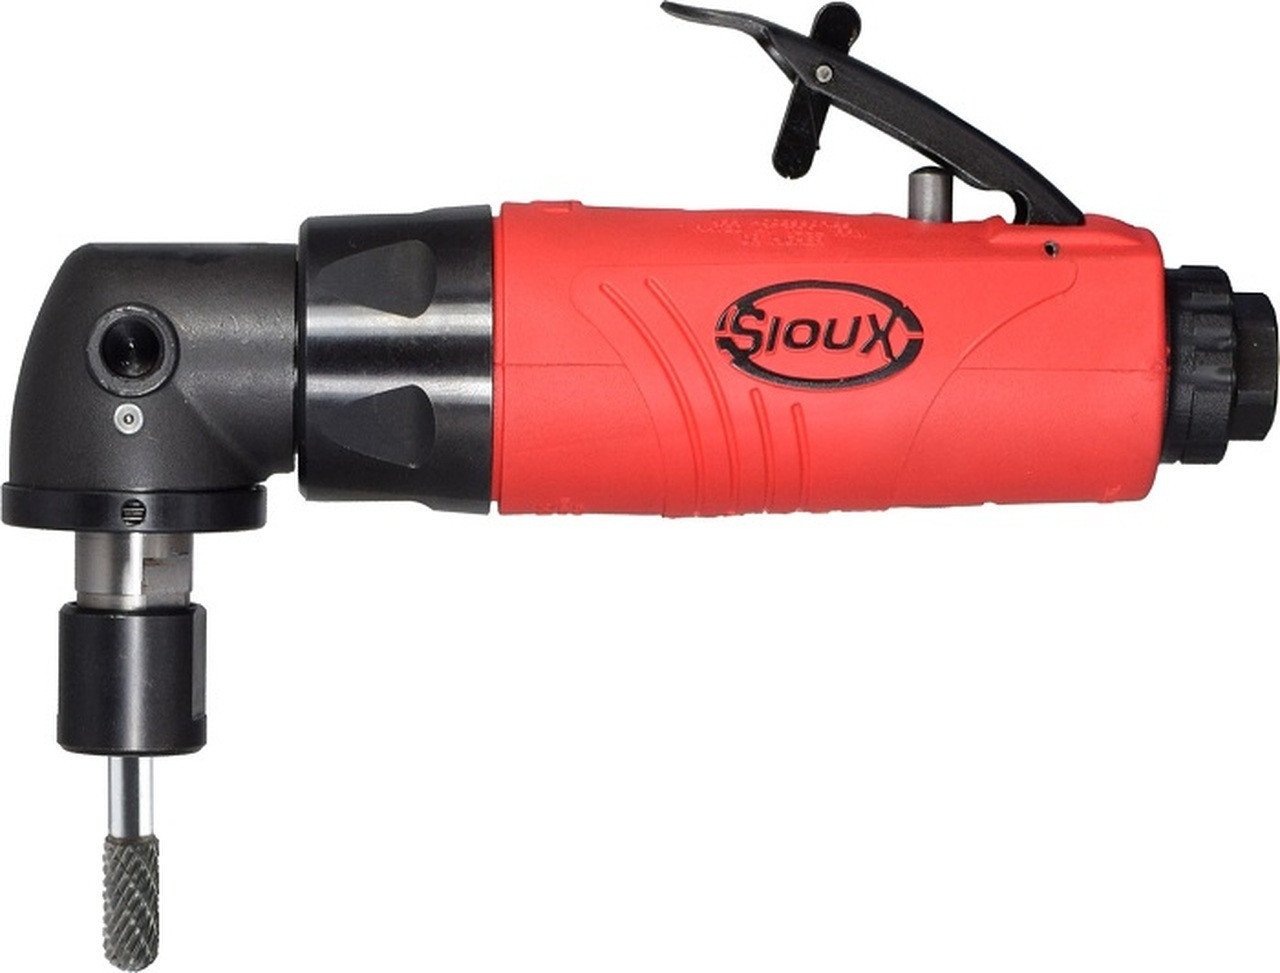 Sioux Tools SAG05S18M6S Right Angle Die Grinder | 0.5 HP | 18000 RPM | 300 Series Collet | Rear Exhaust